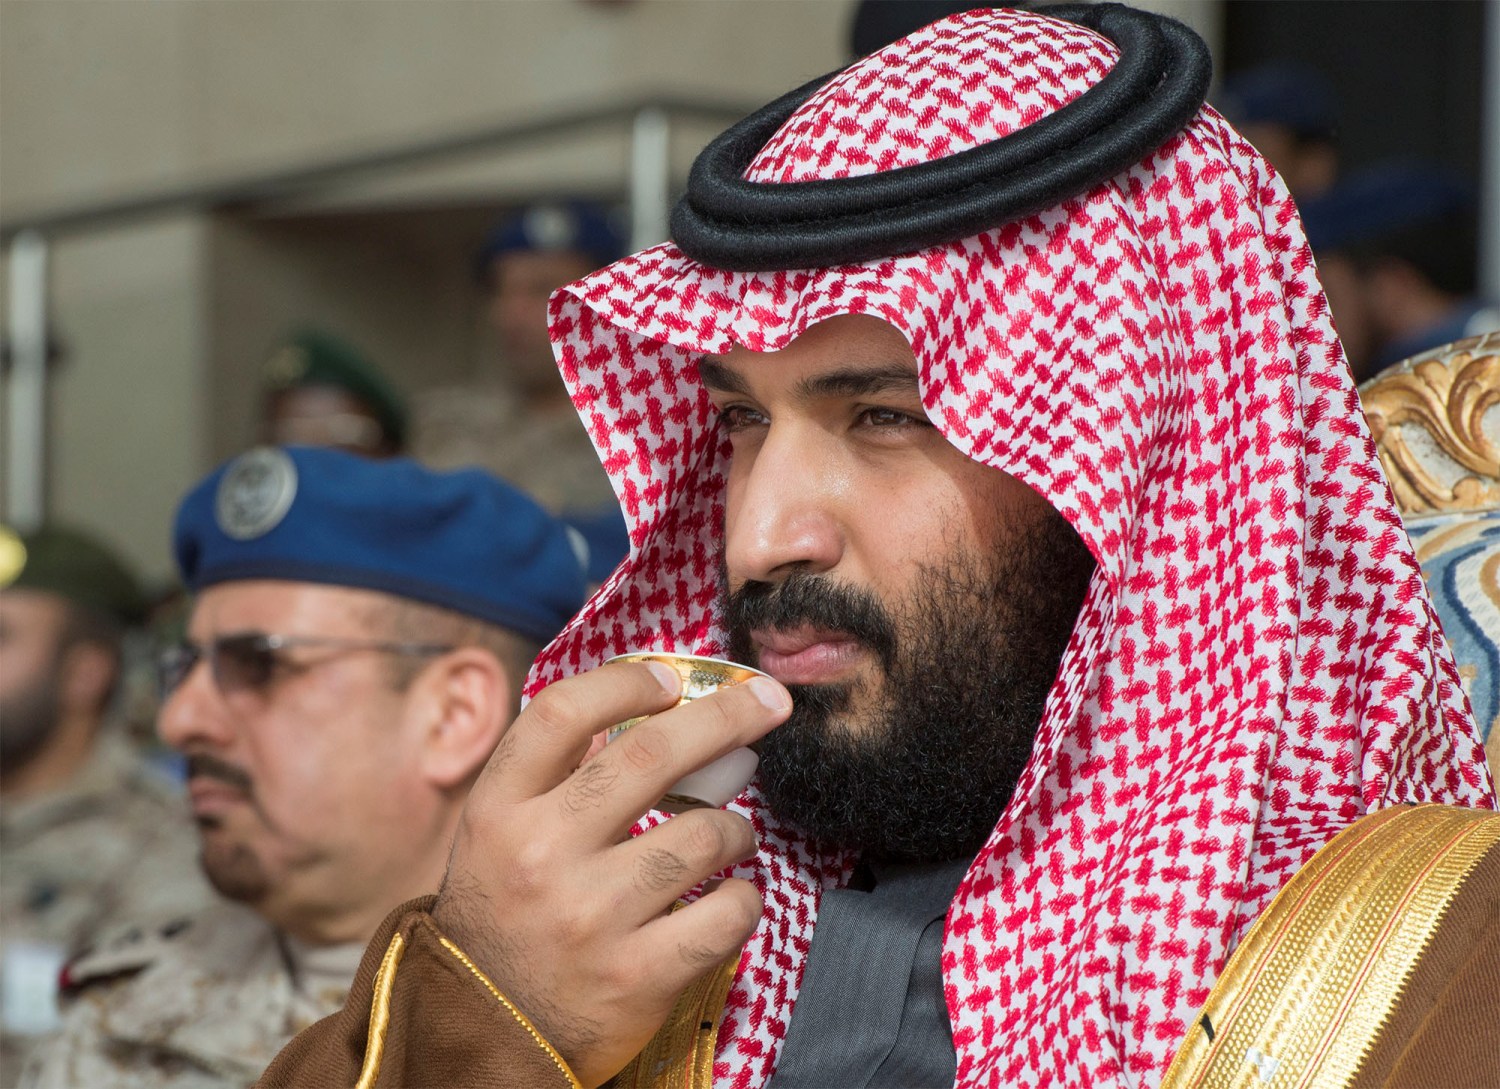 Saudi Arabia's Crown Prince Mohammed bin Salman drinks coffee during the graduation ceremony of the 93rd batch of the cadets of King Faisal Air Academy, in Riyadh, Saudi Arabia, February 21, 2018. Bandar Algaloud/Courtesy of Saudi Royal Court/Handout via REUTERS ATTENTION EDITORS - THIS PICTURE WAS PROVIDED BY A THIRD PARTY. - RC1640D13C90